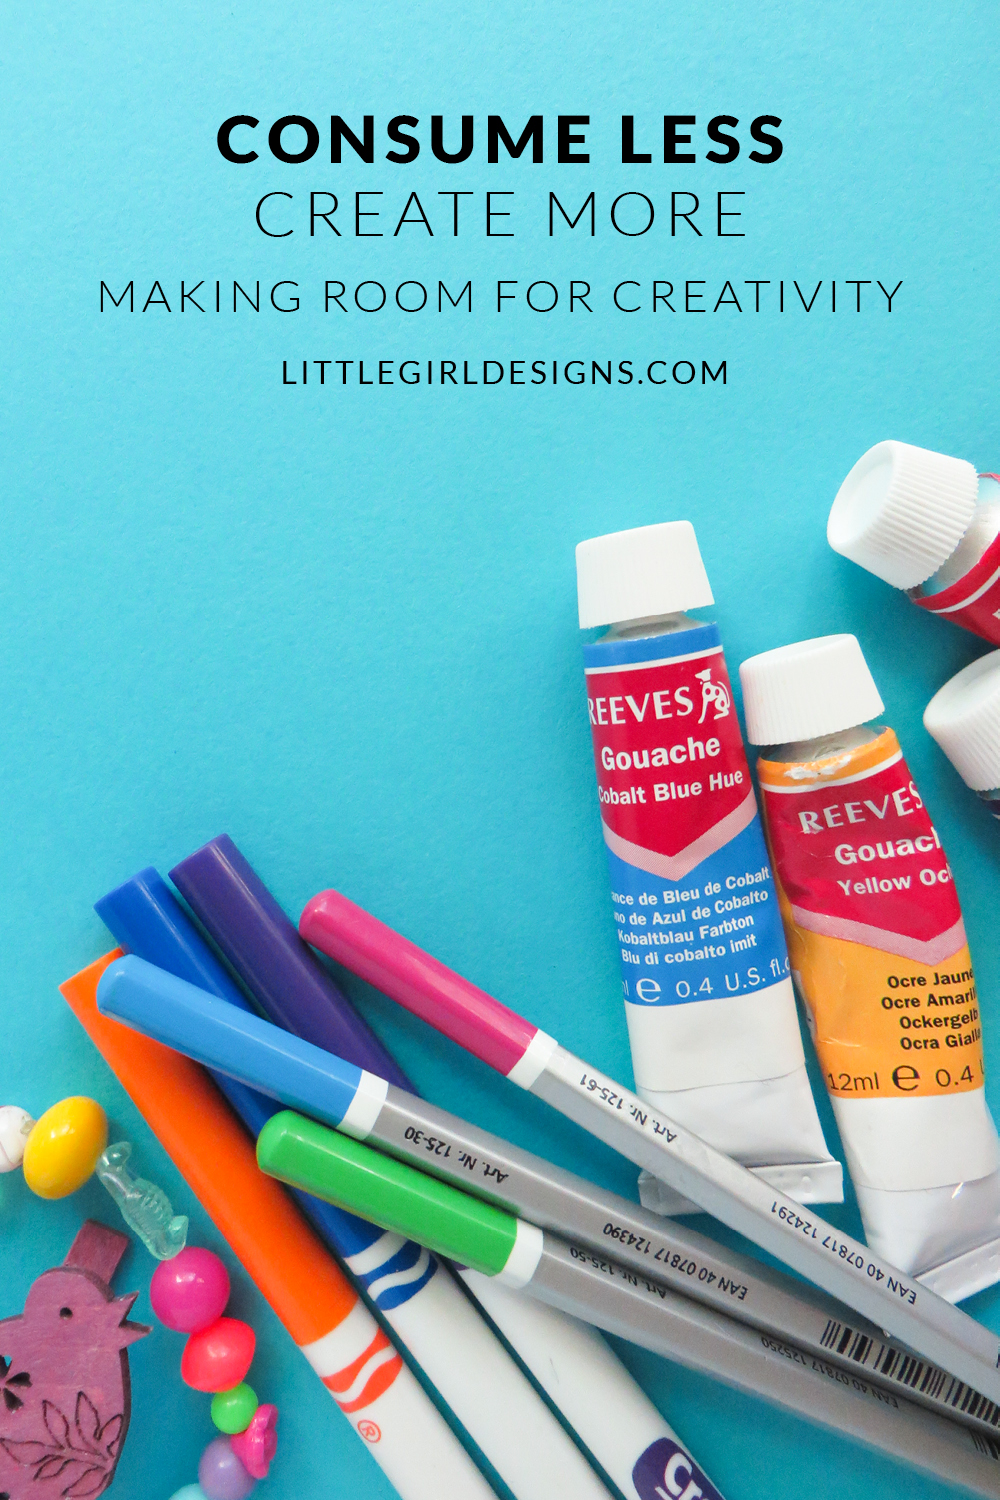 Consume Less, Create More - Have you ever noticed how easy it is to fall into the habit of learning and taking in information to the point where creativity gets pushed to the back burner? Well, believe me, you're not alone. I'm sharing some thoughts about how to make more room for creativity @ littlegirldesigns.com